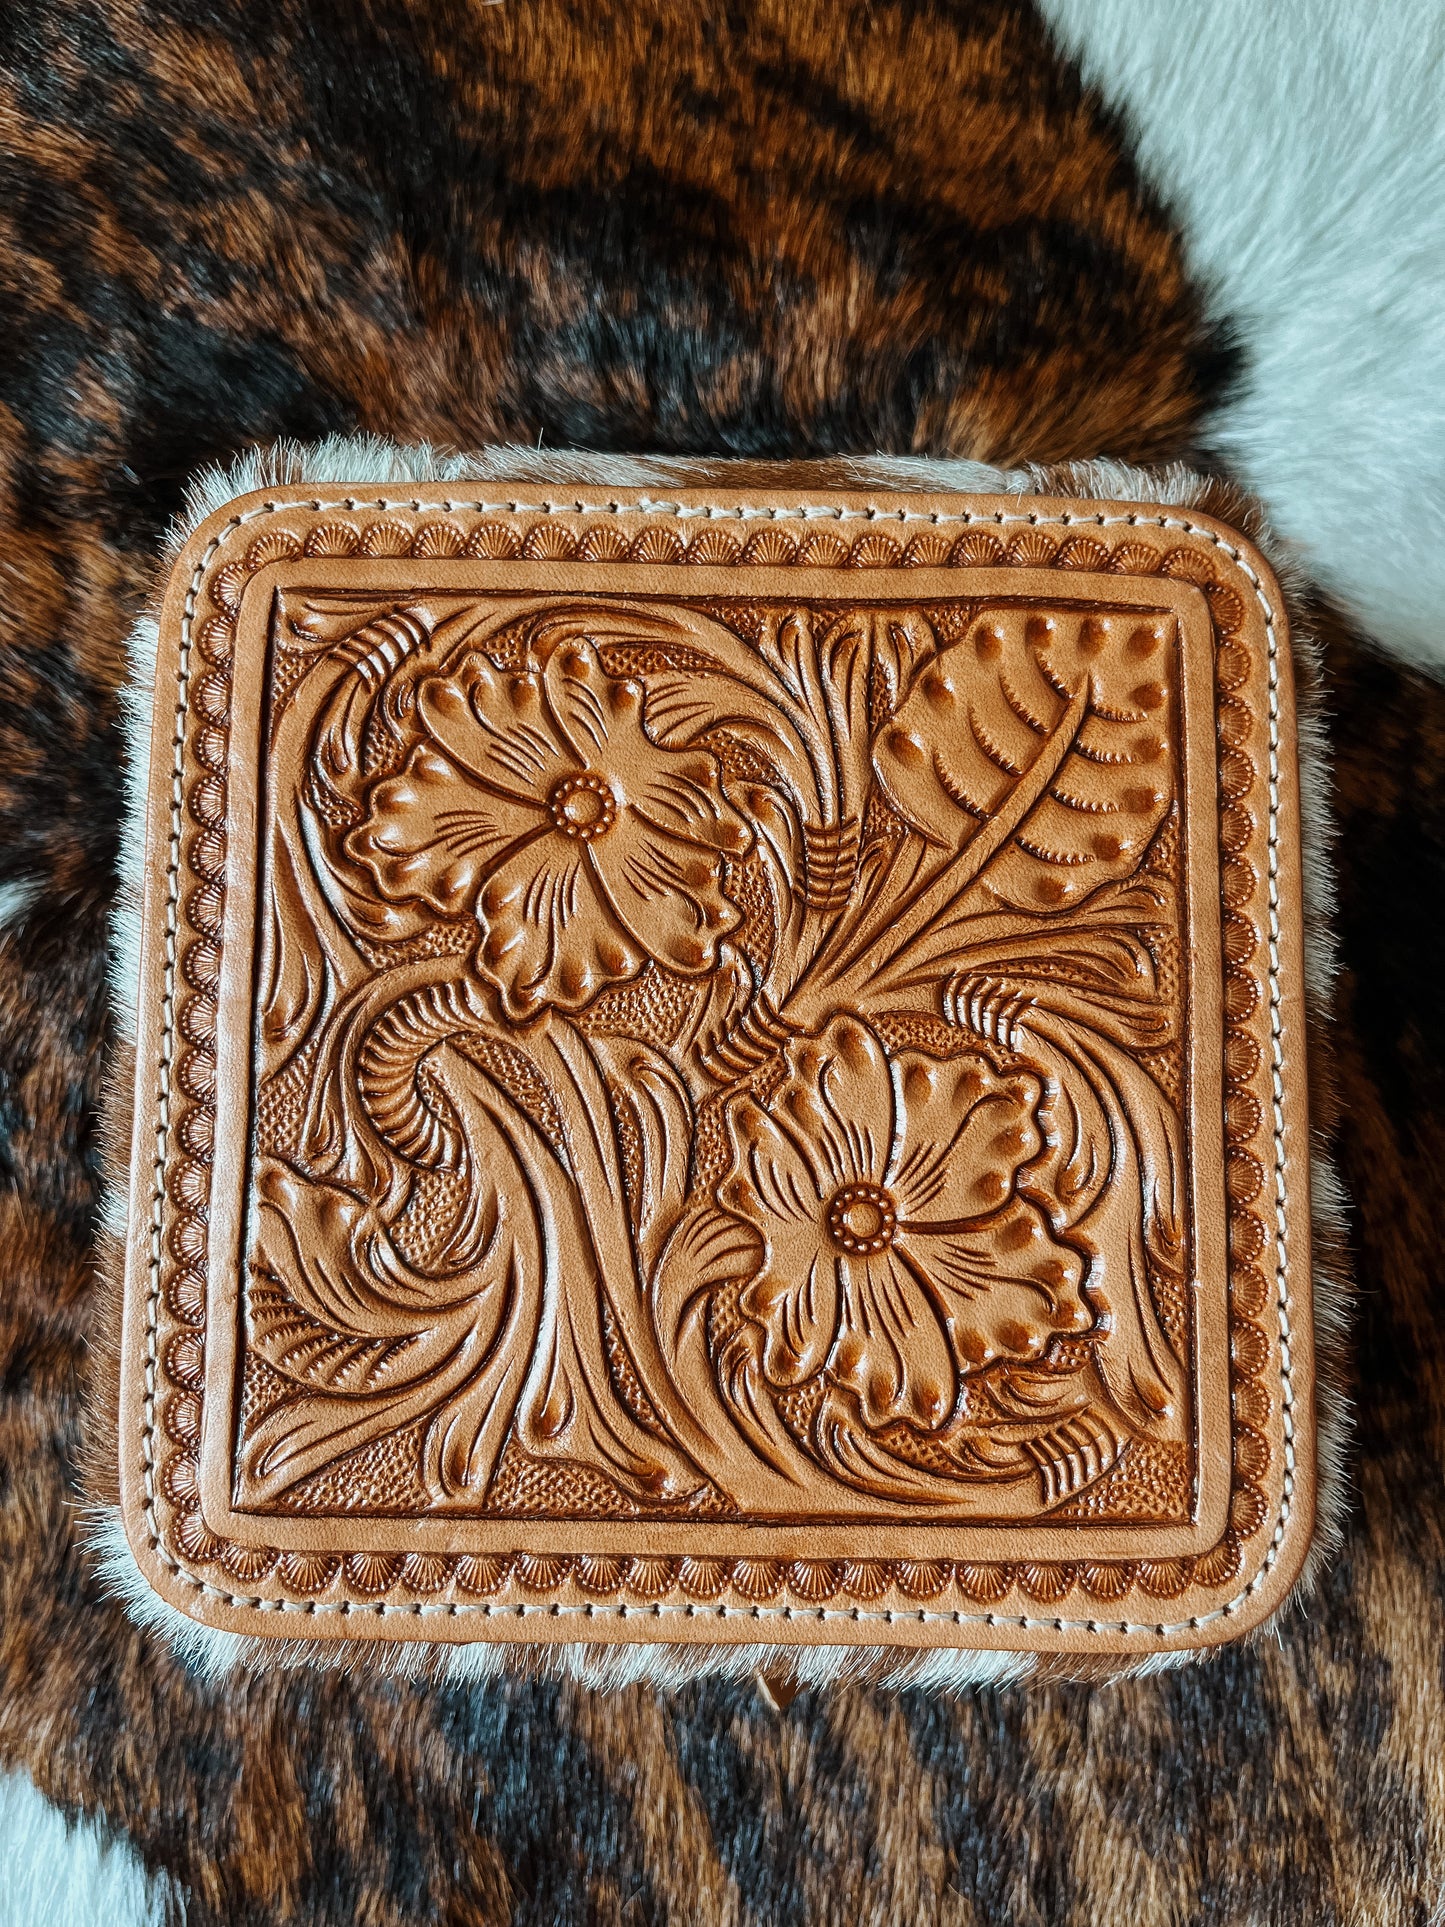 The Brown Hide Jewelry Box